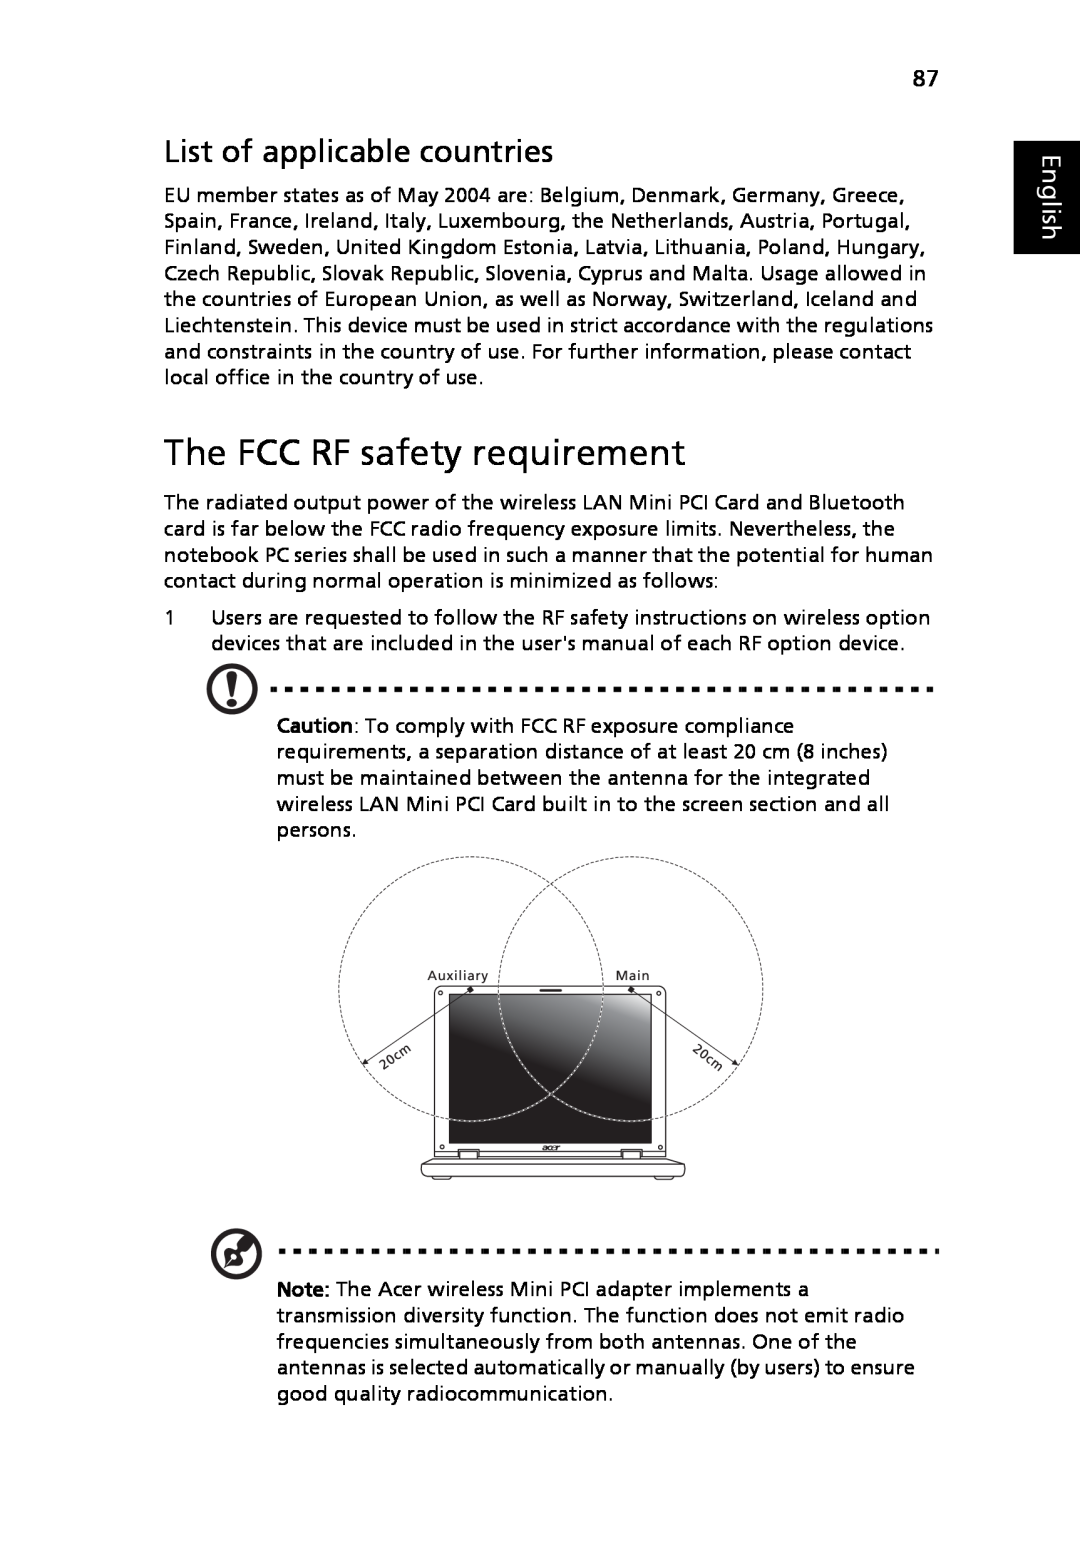 Acer 5010 Series, 5410 Series manual The FCC RF safety requirement, List of applicable countries, English 